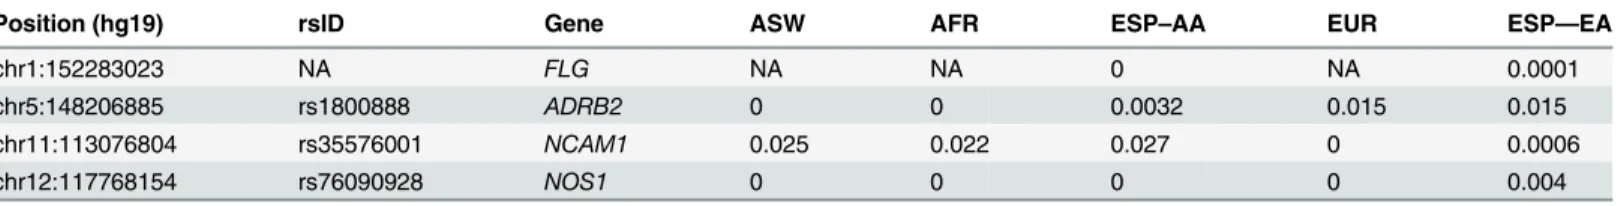 Table 7. Minor allele frequencies of four nonsynonymous variants associated with asthma following severe RSV bronchiolitis in the ASW, AFR, and EUR populations from the 1000 Genomes Project, and in European (EA) and African Americans (AA) from the Exome Se